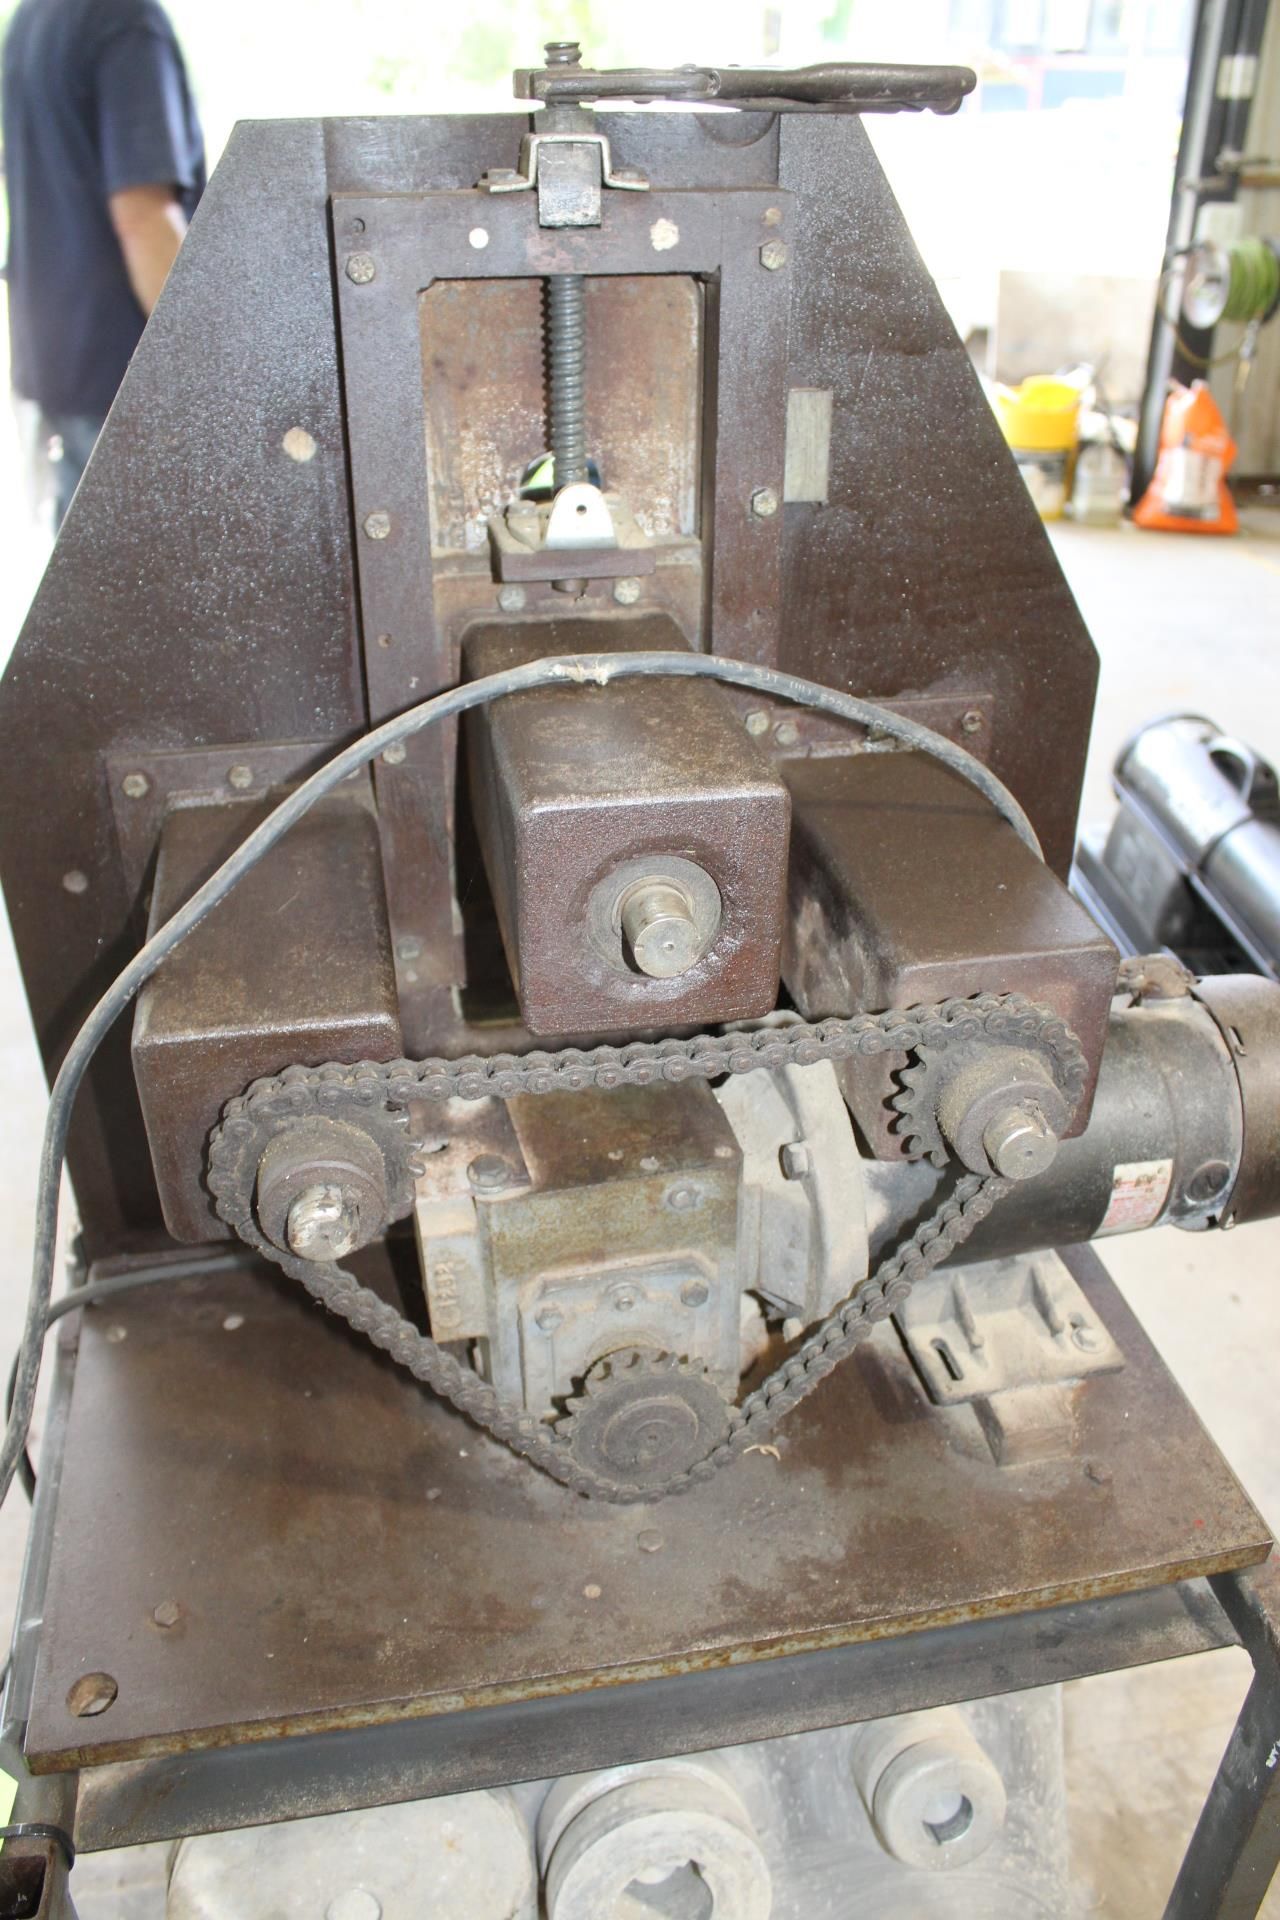 Dayton Tube Bending Machine with Accessories, on Rolling Cart - Image 3 of 5